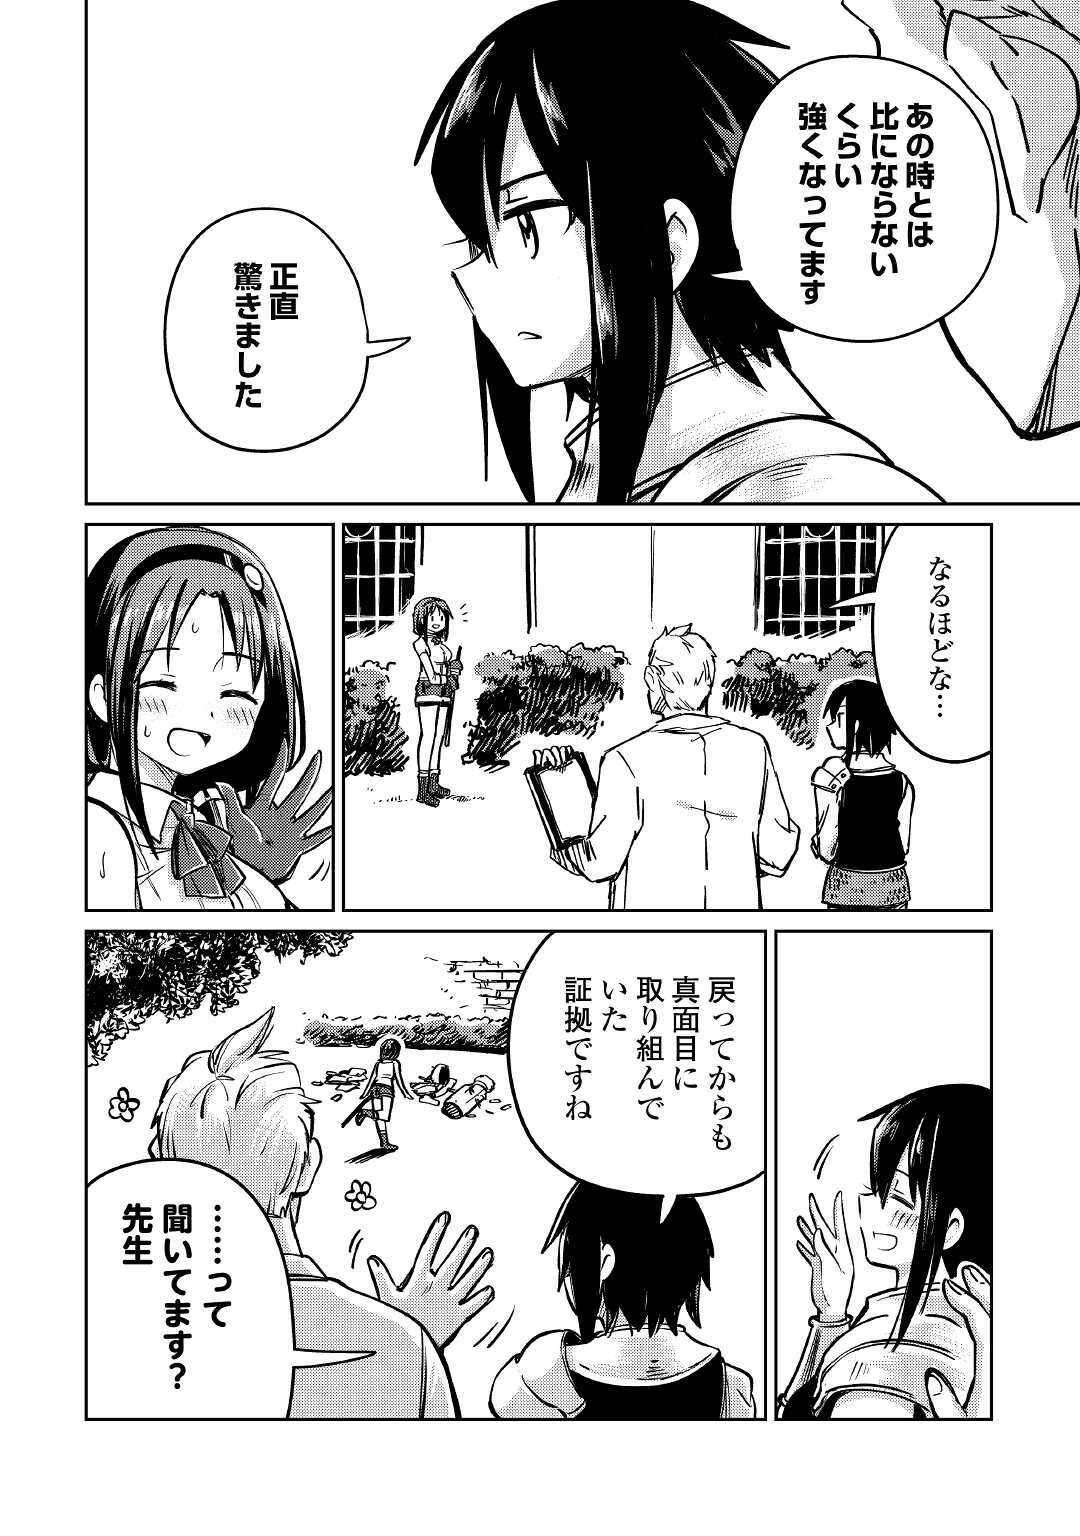 The Former Structural Researcher’s Story of Otherworldly Adventure 第27話 - Page 14